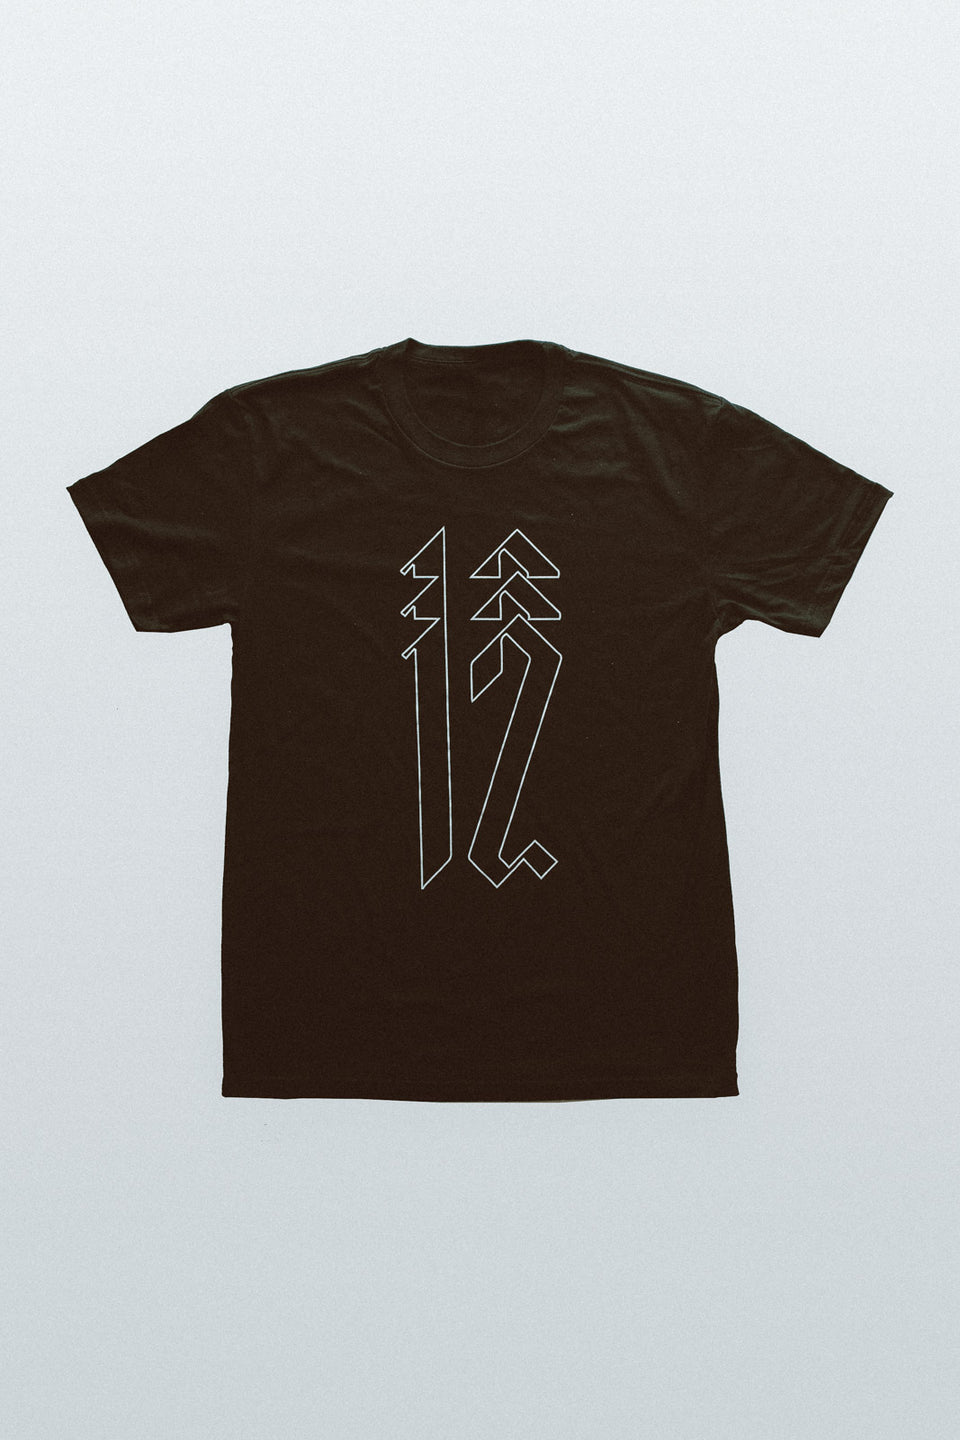 12 Outline Tee